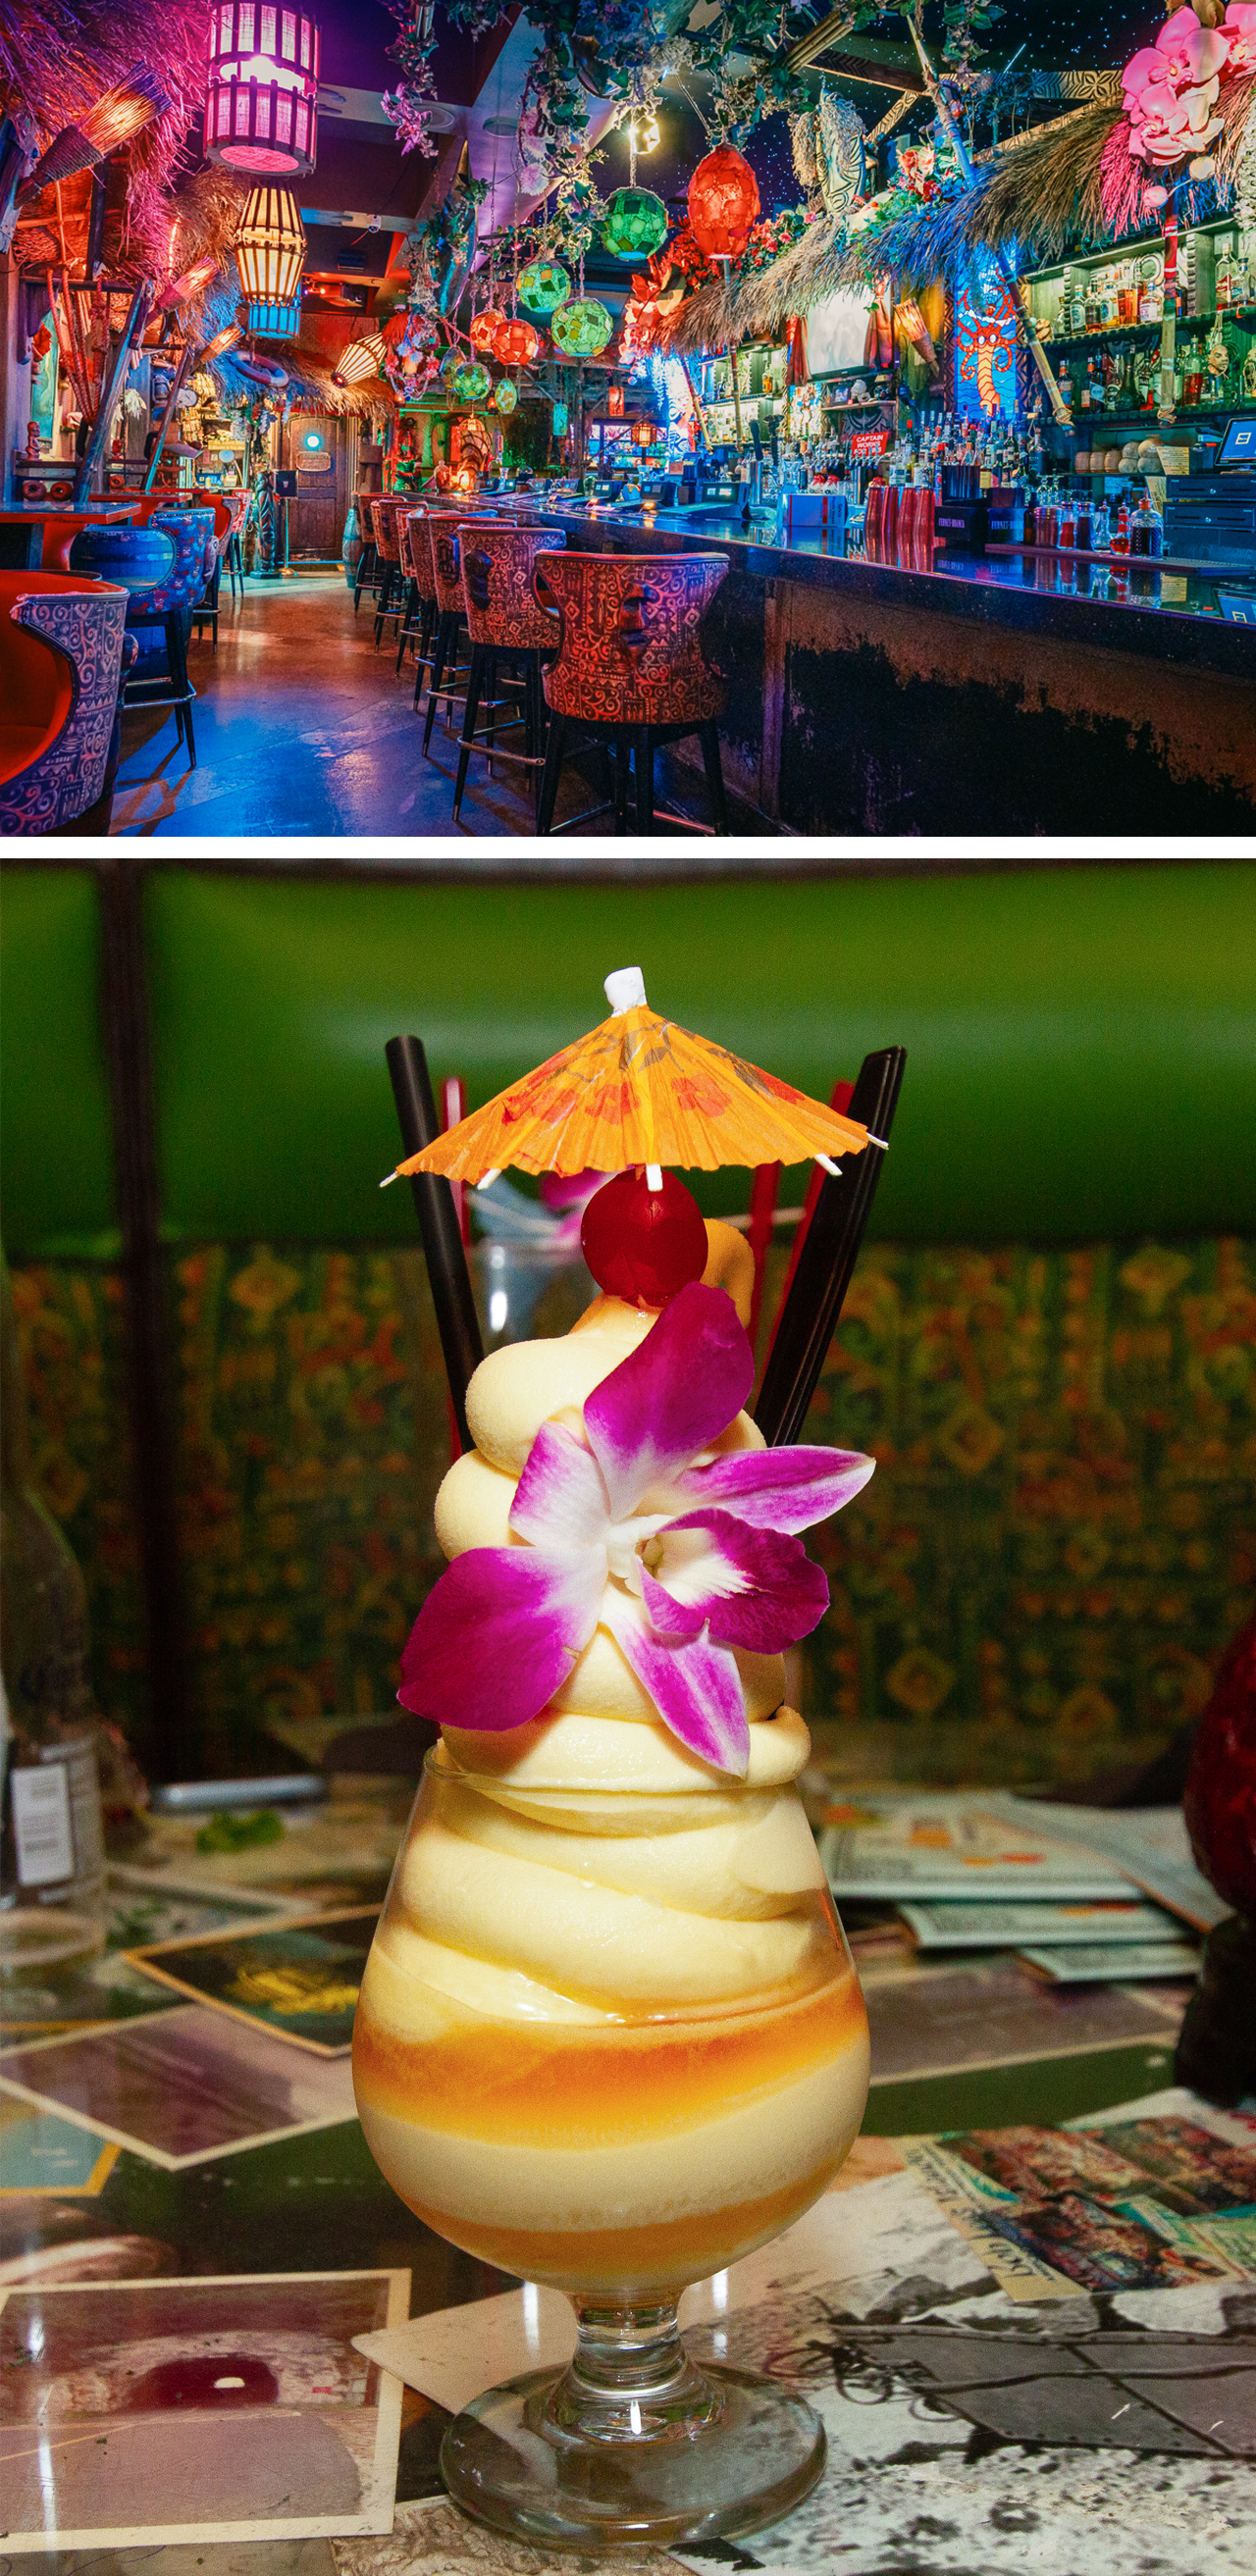 The Golden Tiki in Chinatown has Dole Whip on the menu and eye-popping decor.